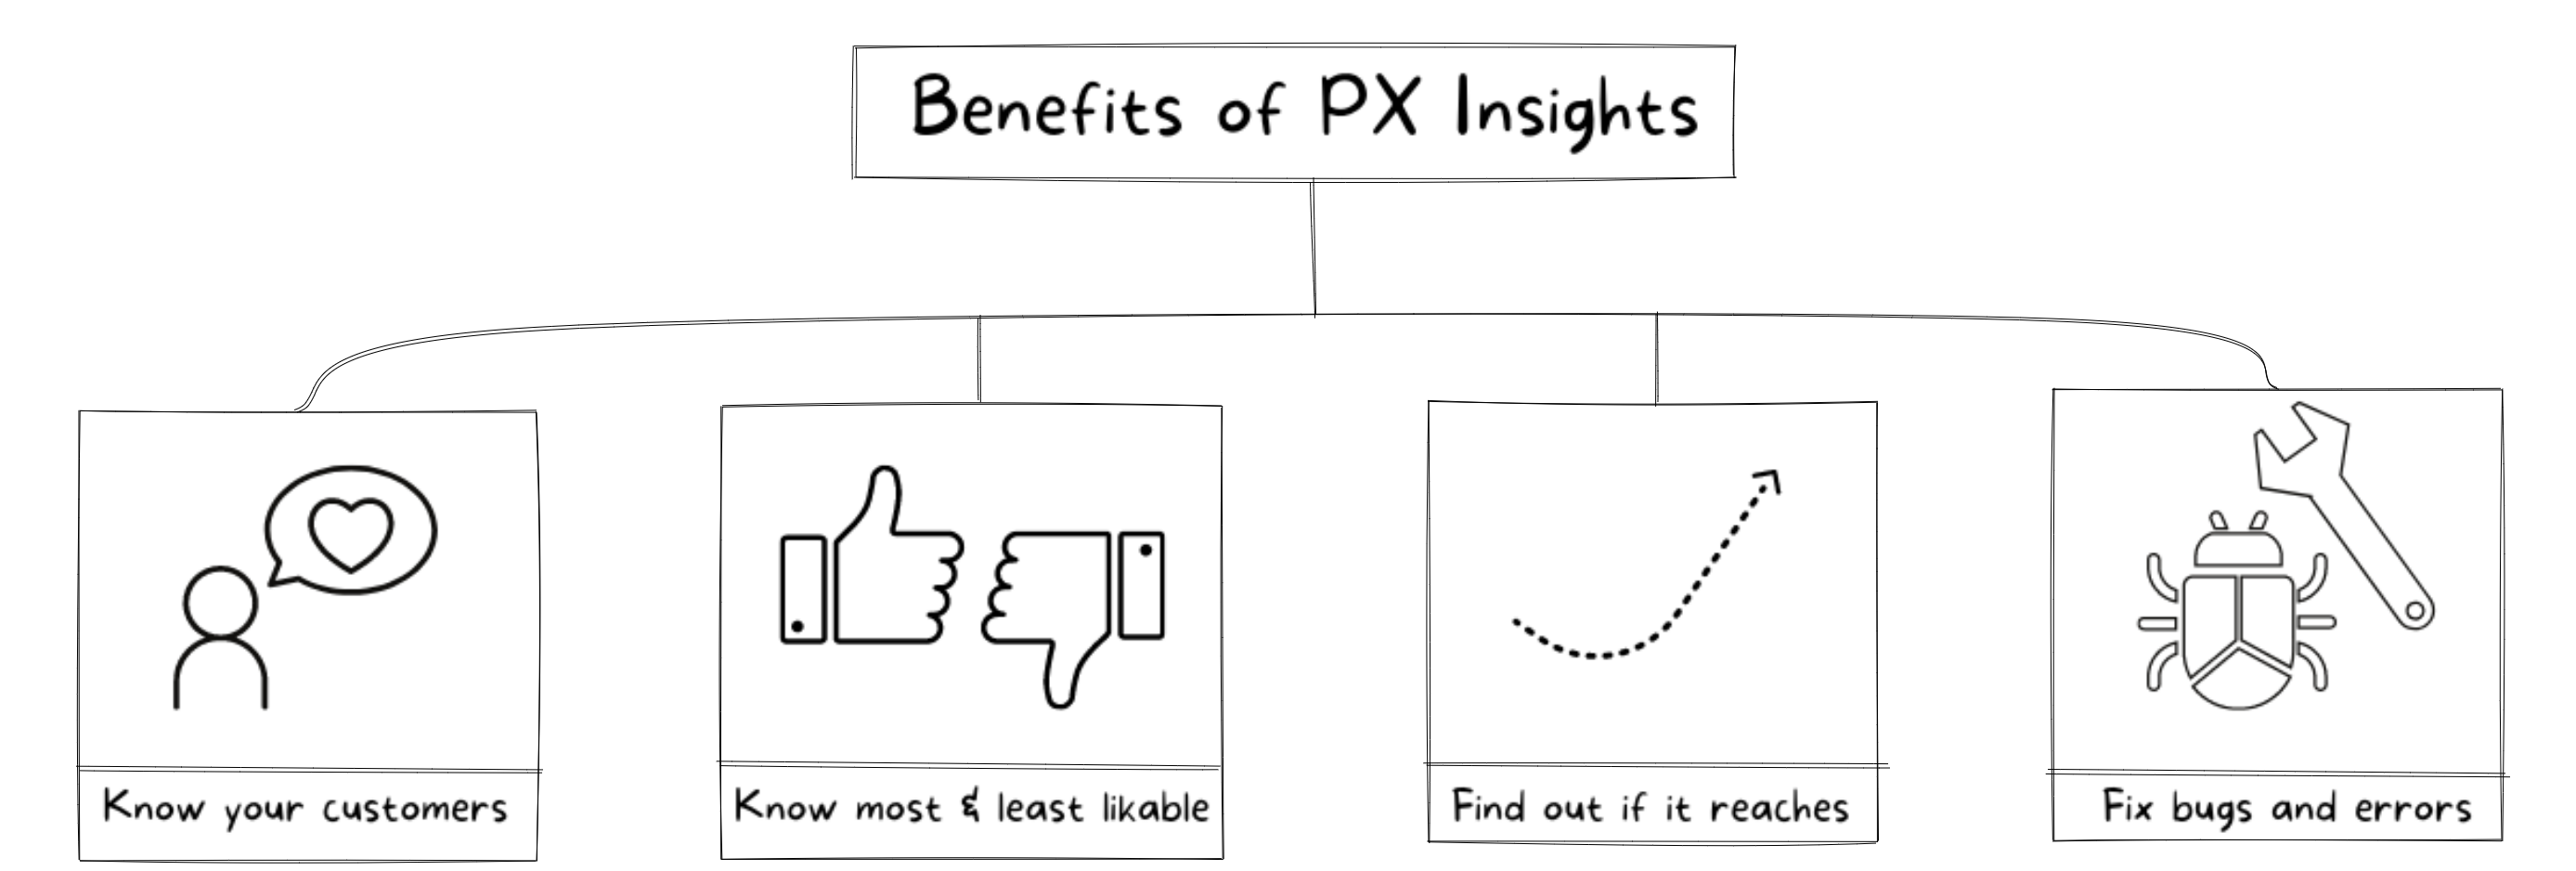 Benefits of PX insights